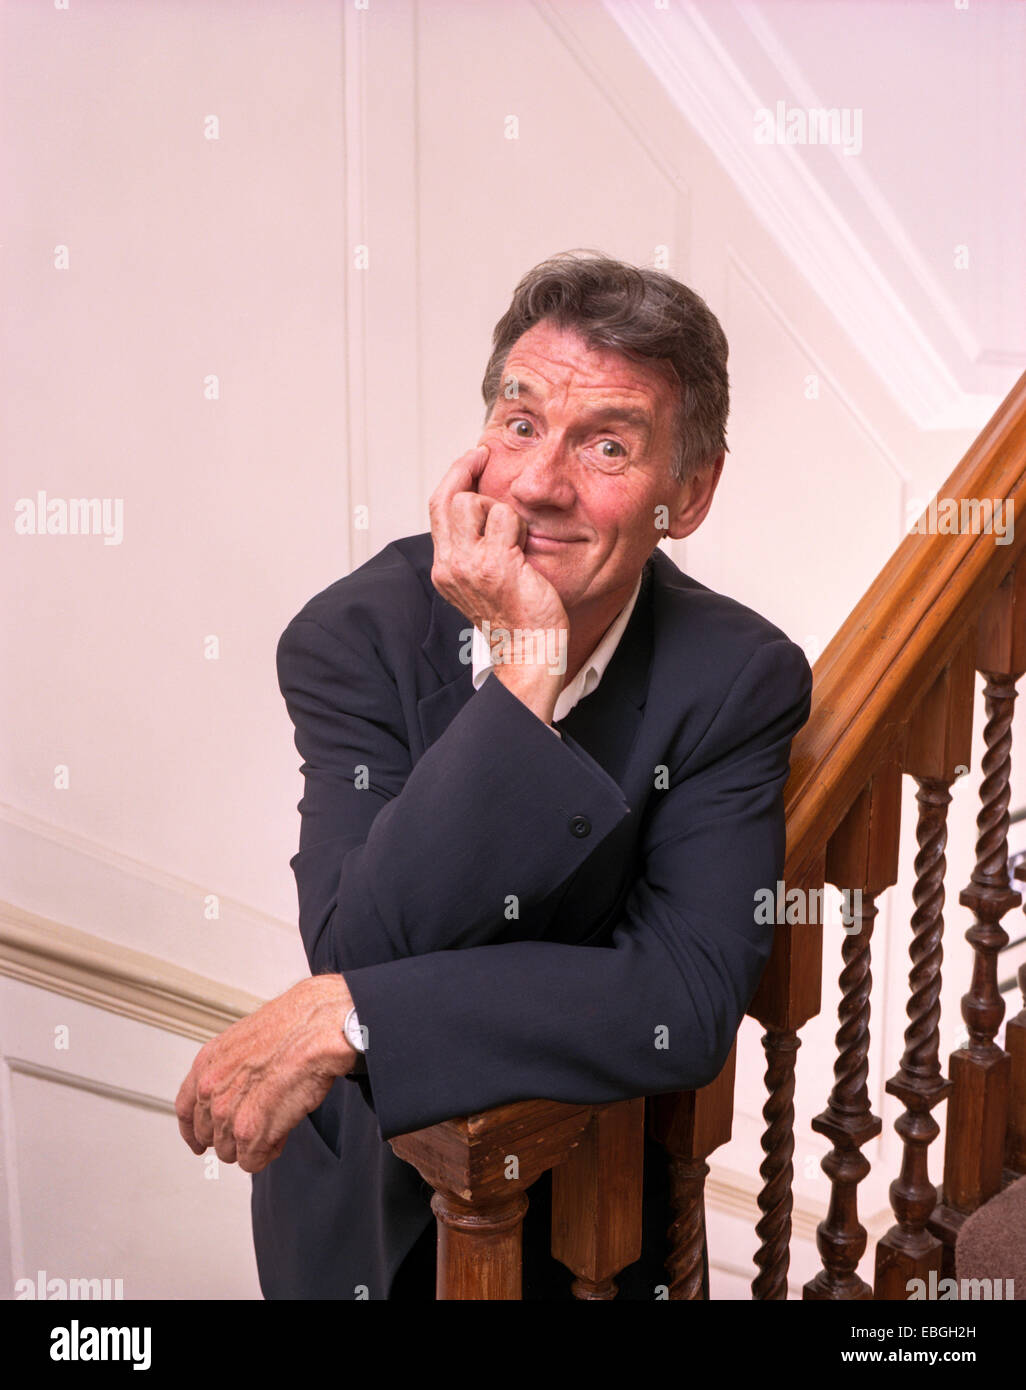 Michael Palin, Comedian, actor, writer and television presenter, Photographed in London, England. Stock Photo